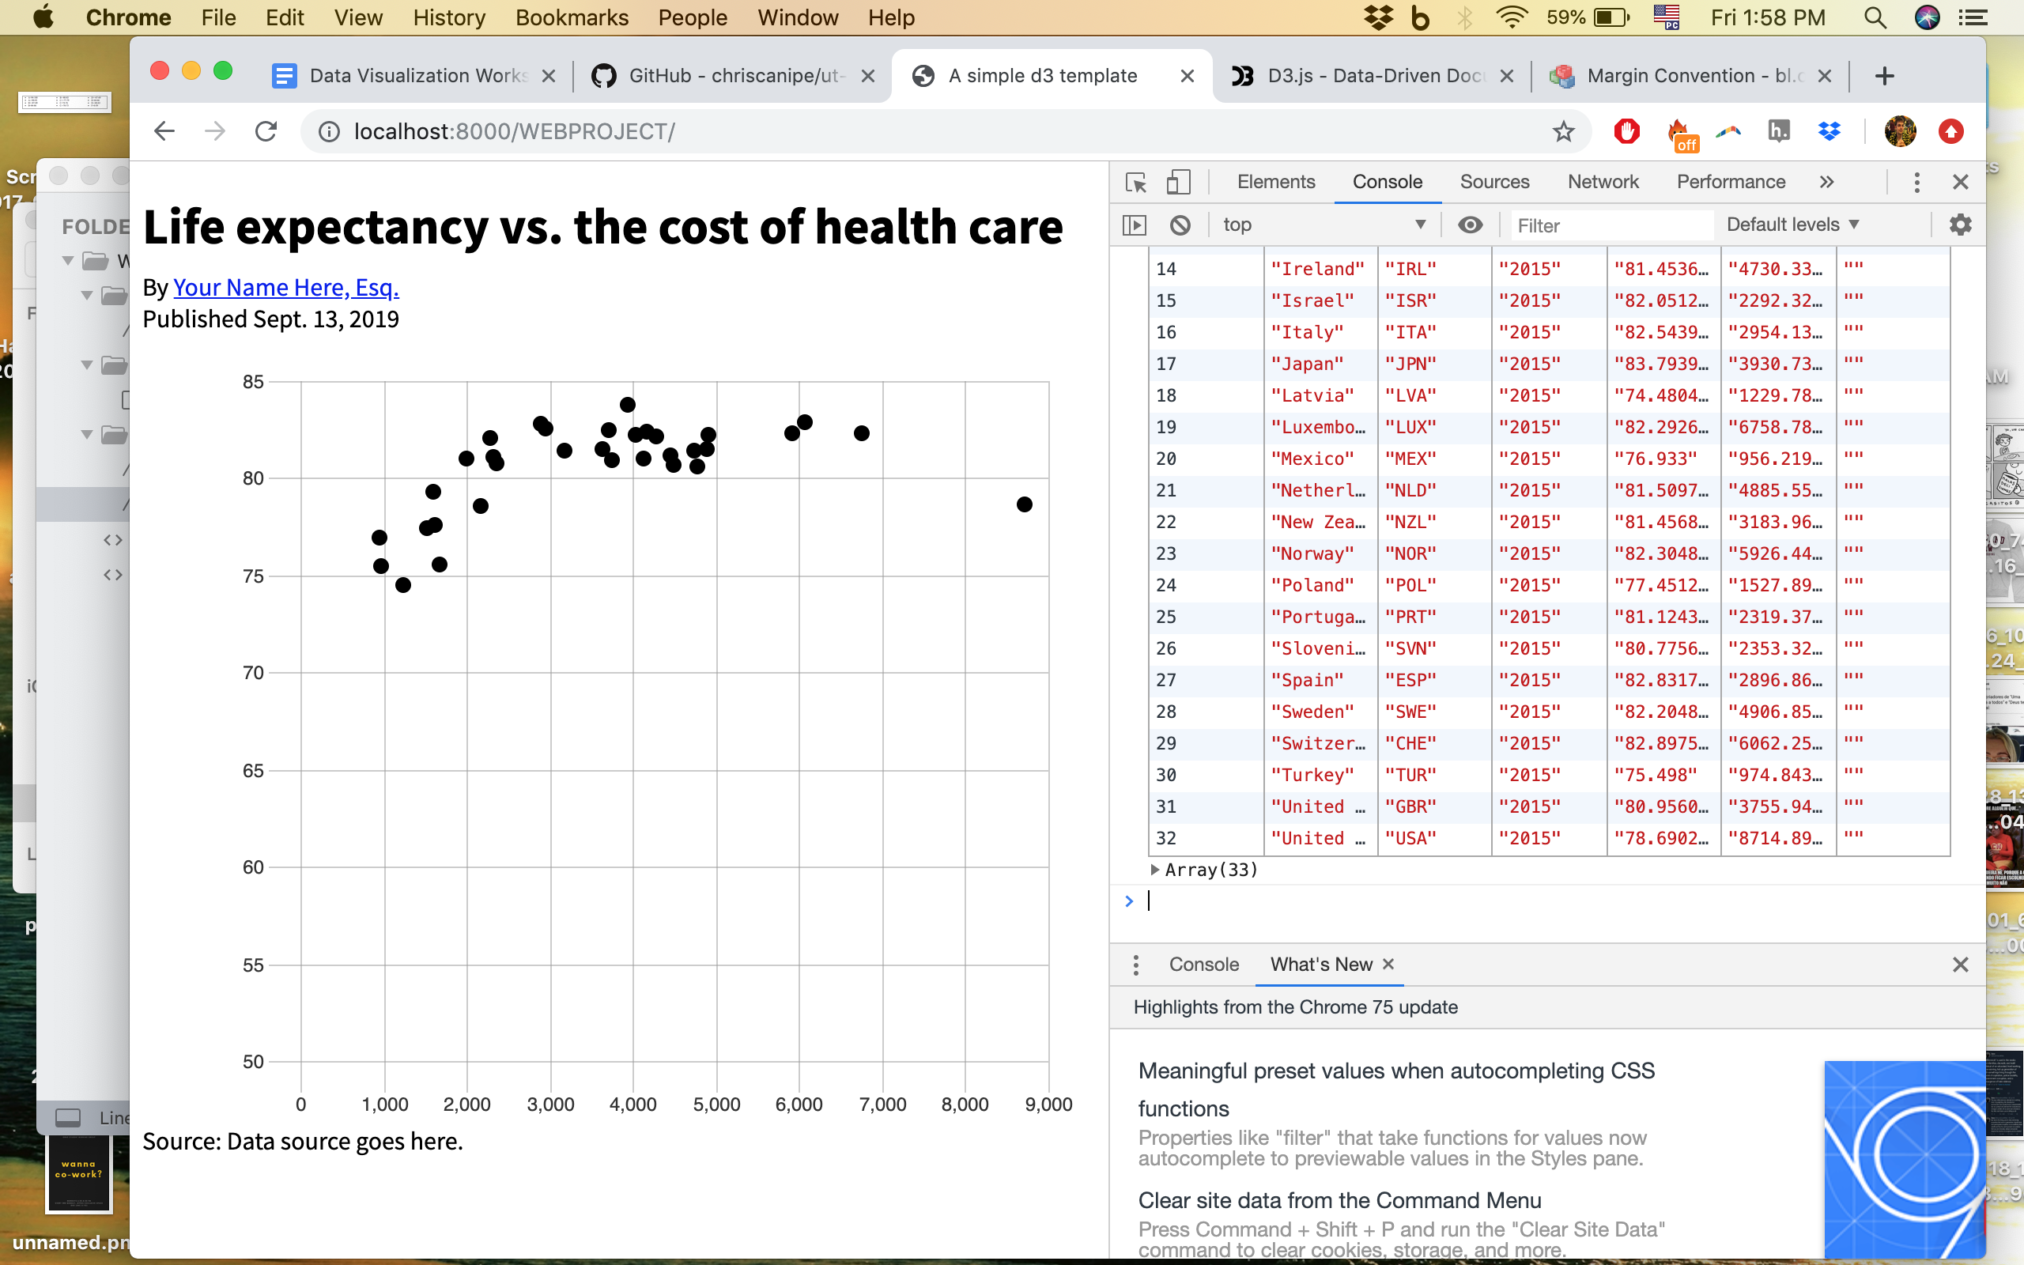 A scatterplot of life expectancy versus the cost of healthcare with dots spread throughout